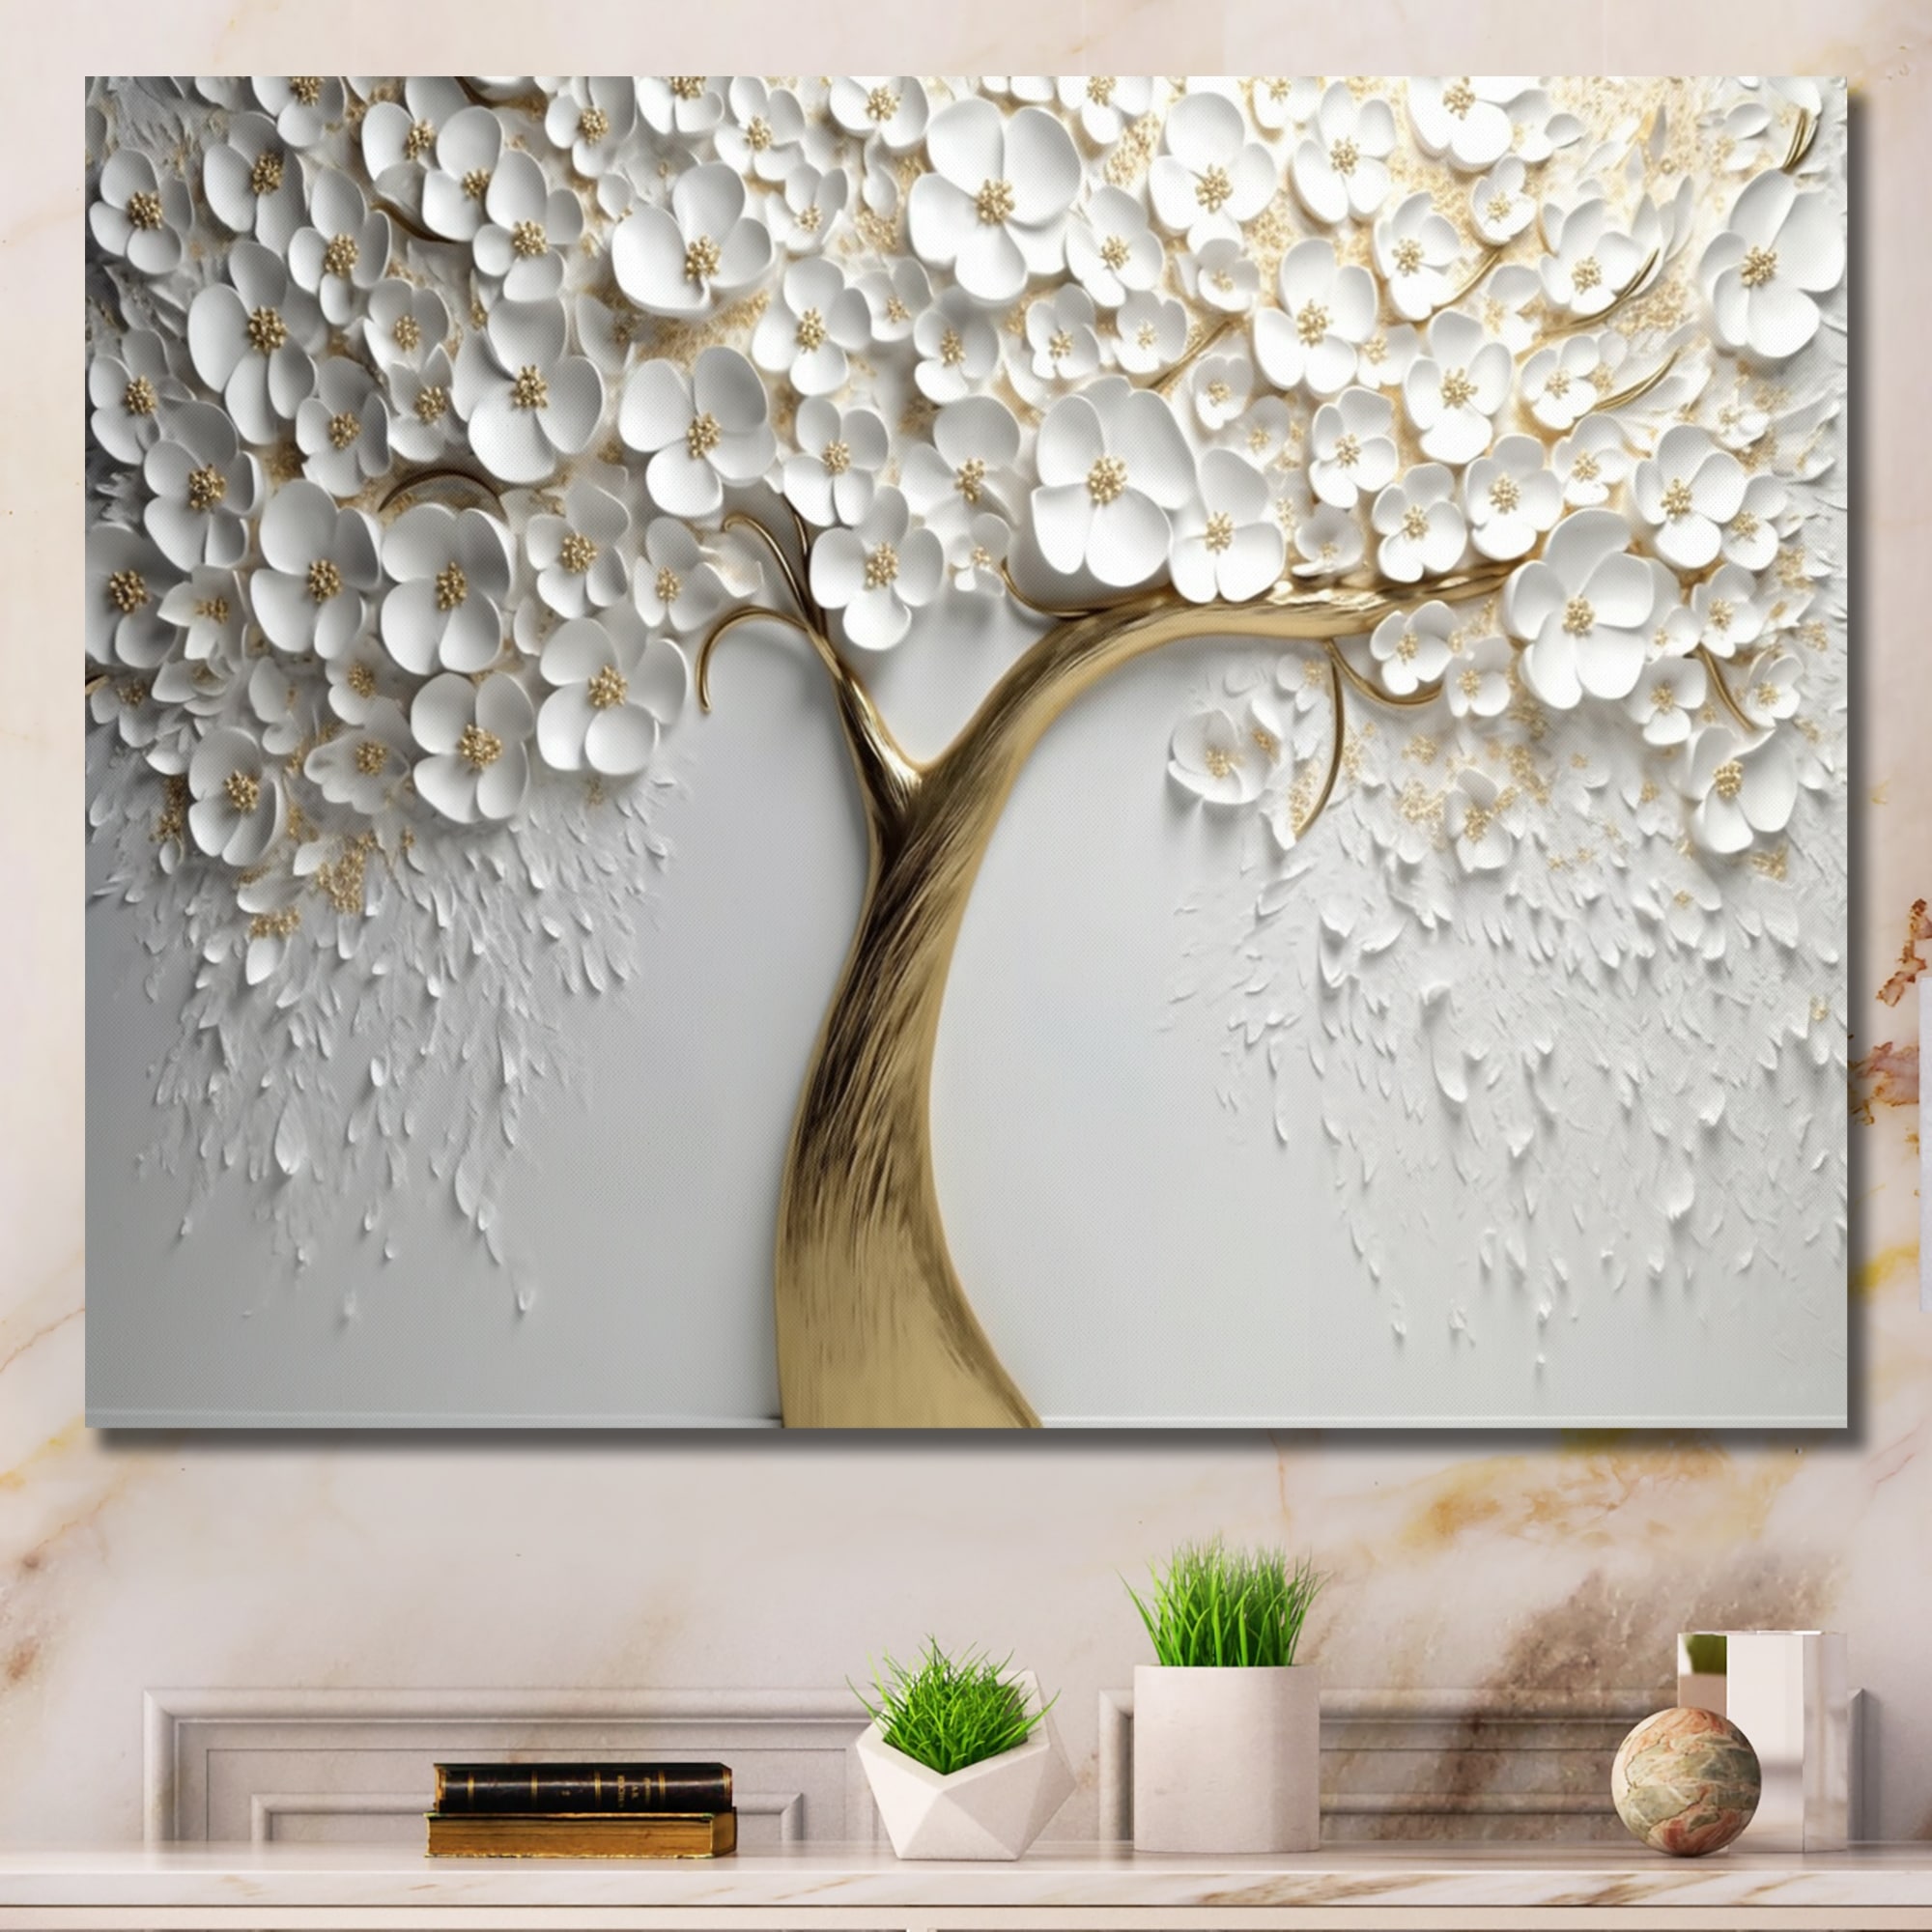 https://ak1.ostkcdn.com/images/products/is/images/direct/07d66c5514aeb673d3f4bceb6837add0cdd366bd/Designart-%22White-Orchid-Tree-Garden-Of-Branches-V%22-Tree-Floral-Canvas-Print.jpg